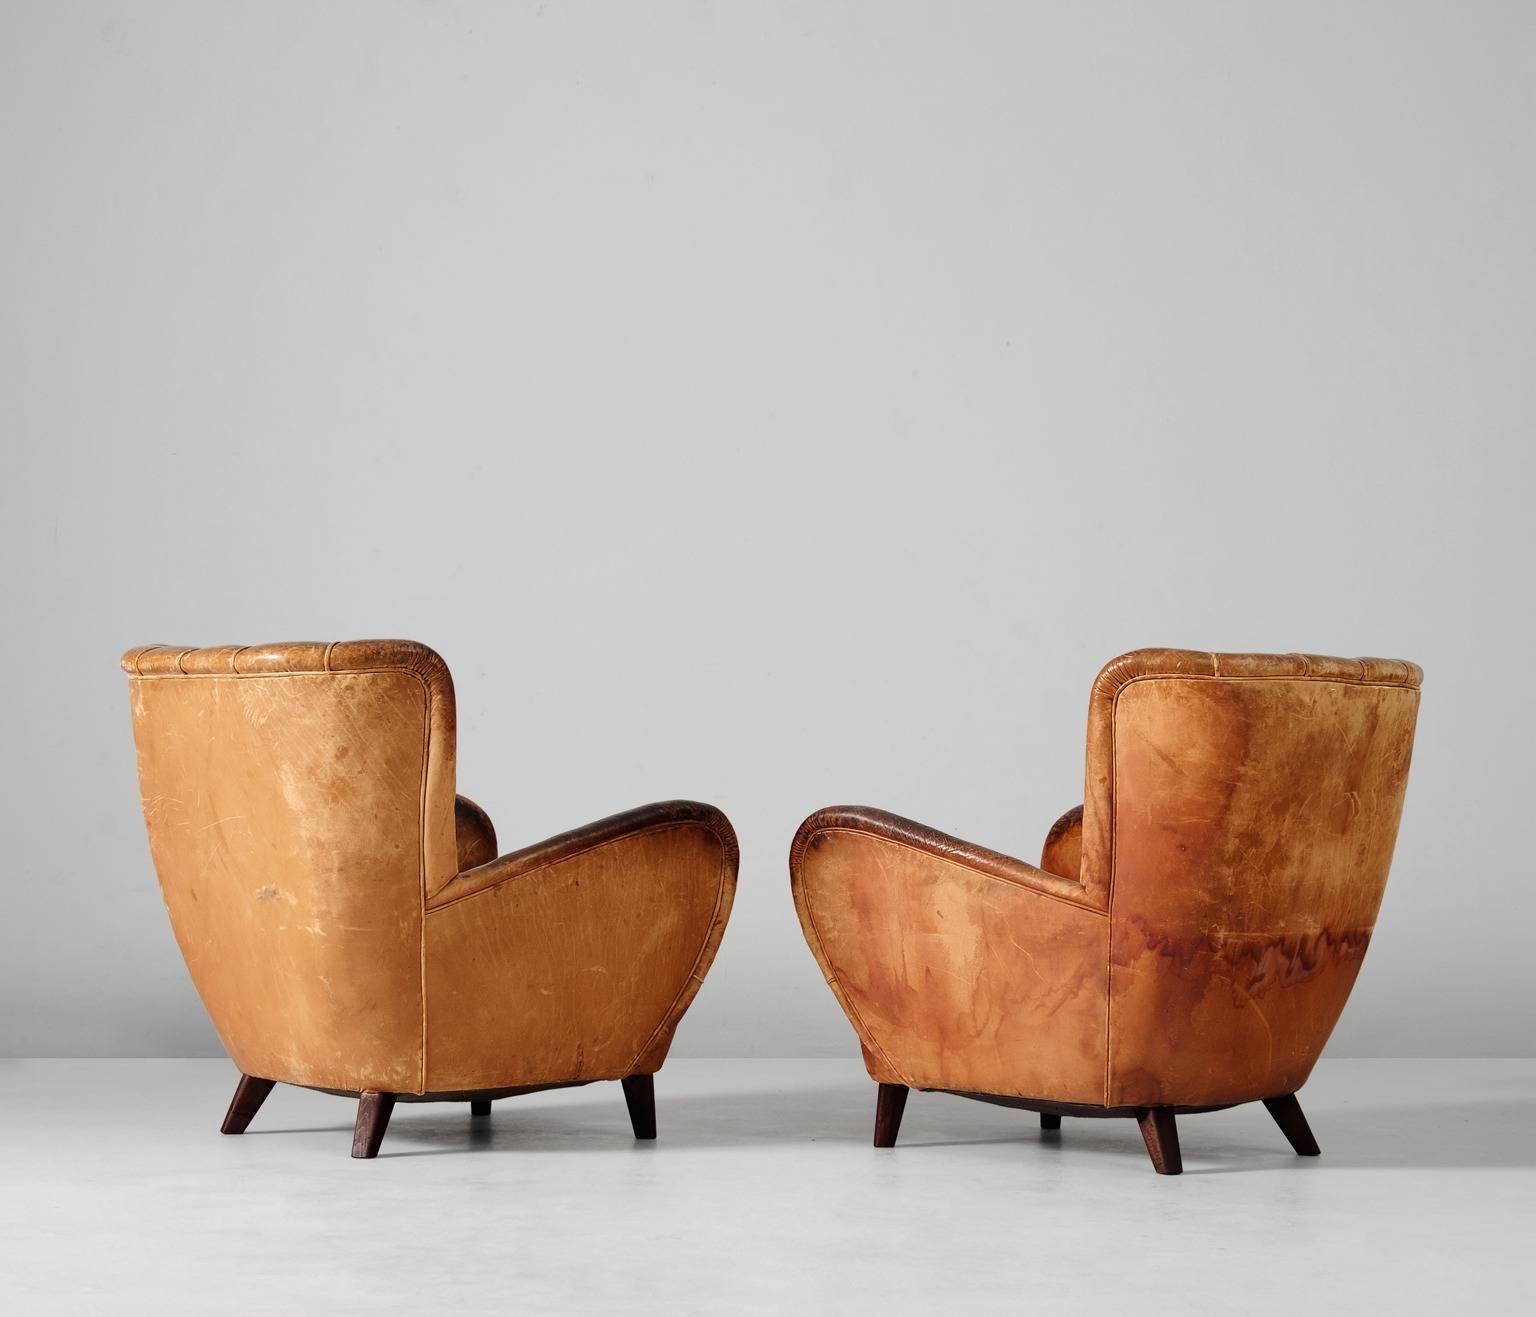 European Lounge Chairs in Original Cognac Leather Upholstery, 1930s